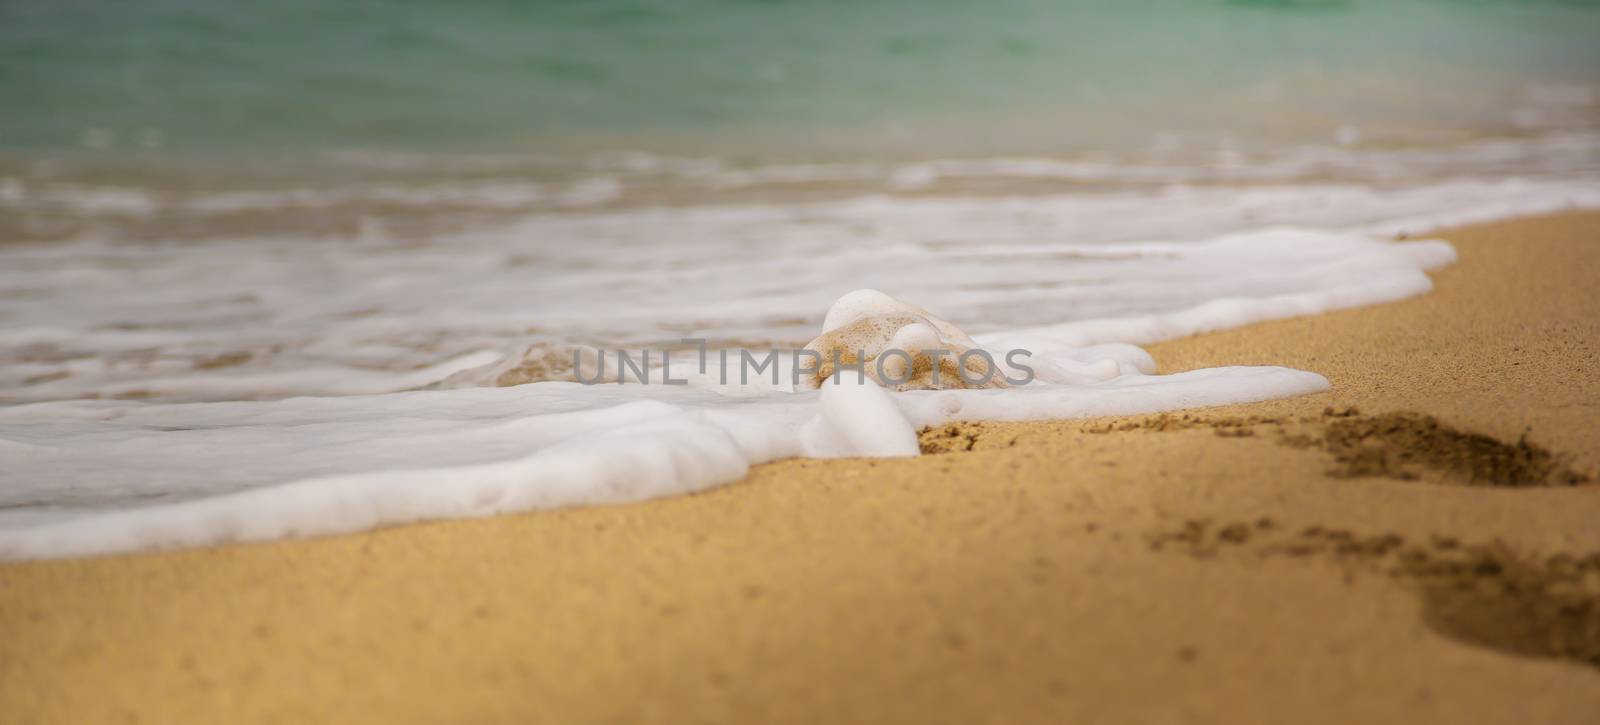 Little wave on a sand beach with traces in the sand by sandra_fotodesign